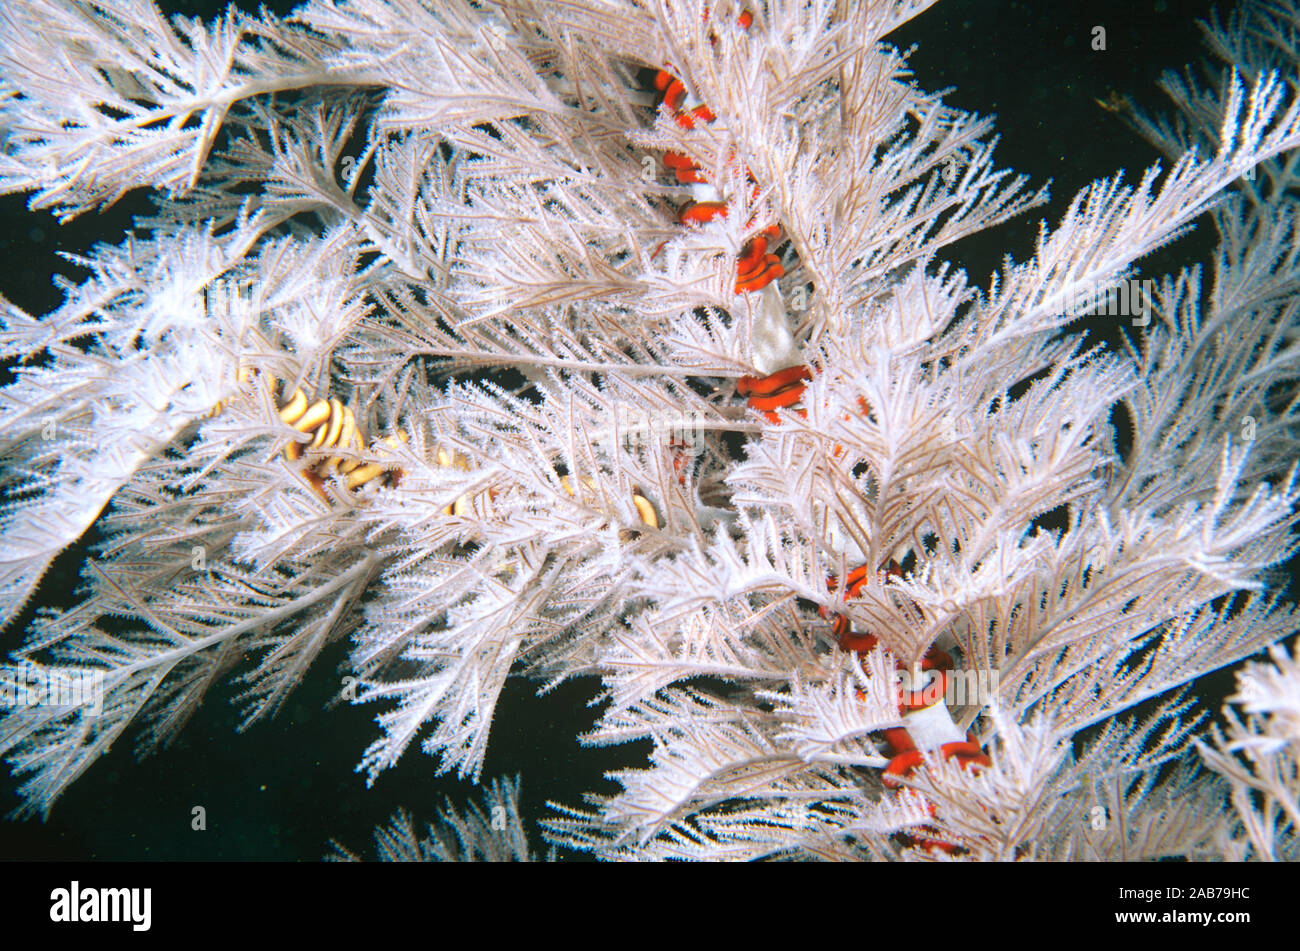 Black coral (Antipathes sp.),), light-coloured living tissues covering black skeleton, with Serpent brittle stars (Astrobrachion adhaerens) entwined a Stock Photo